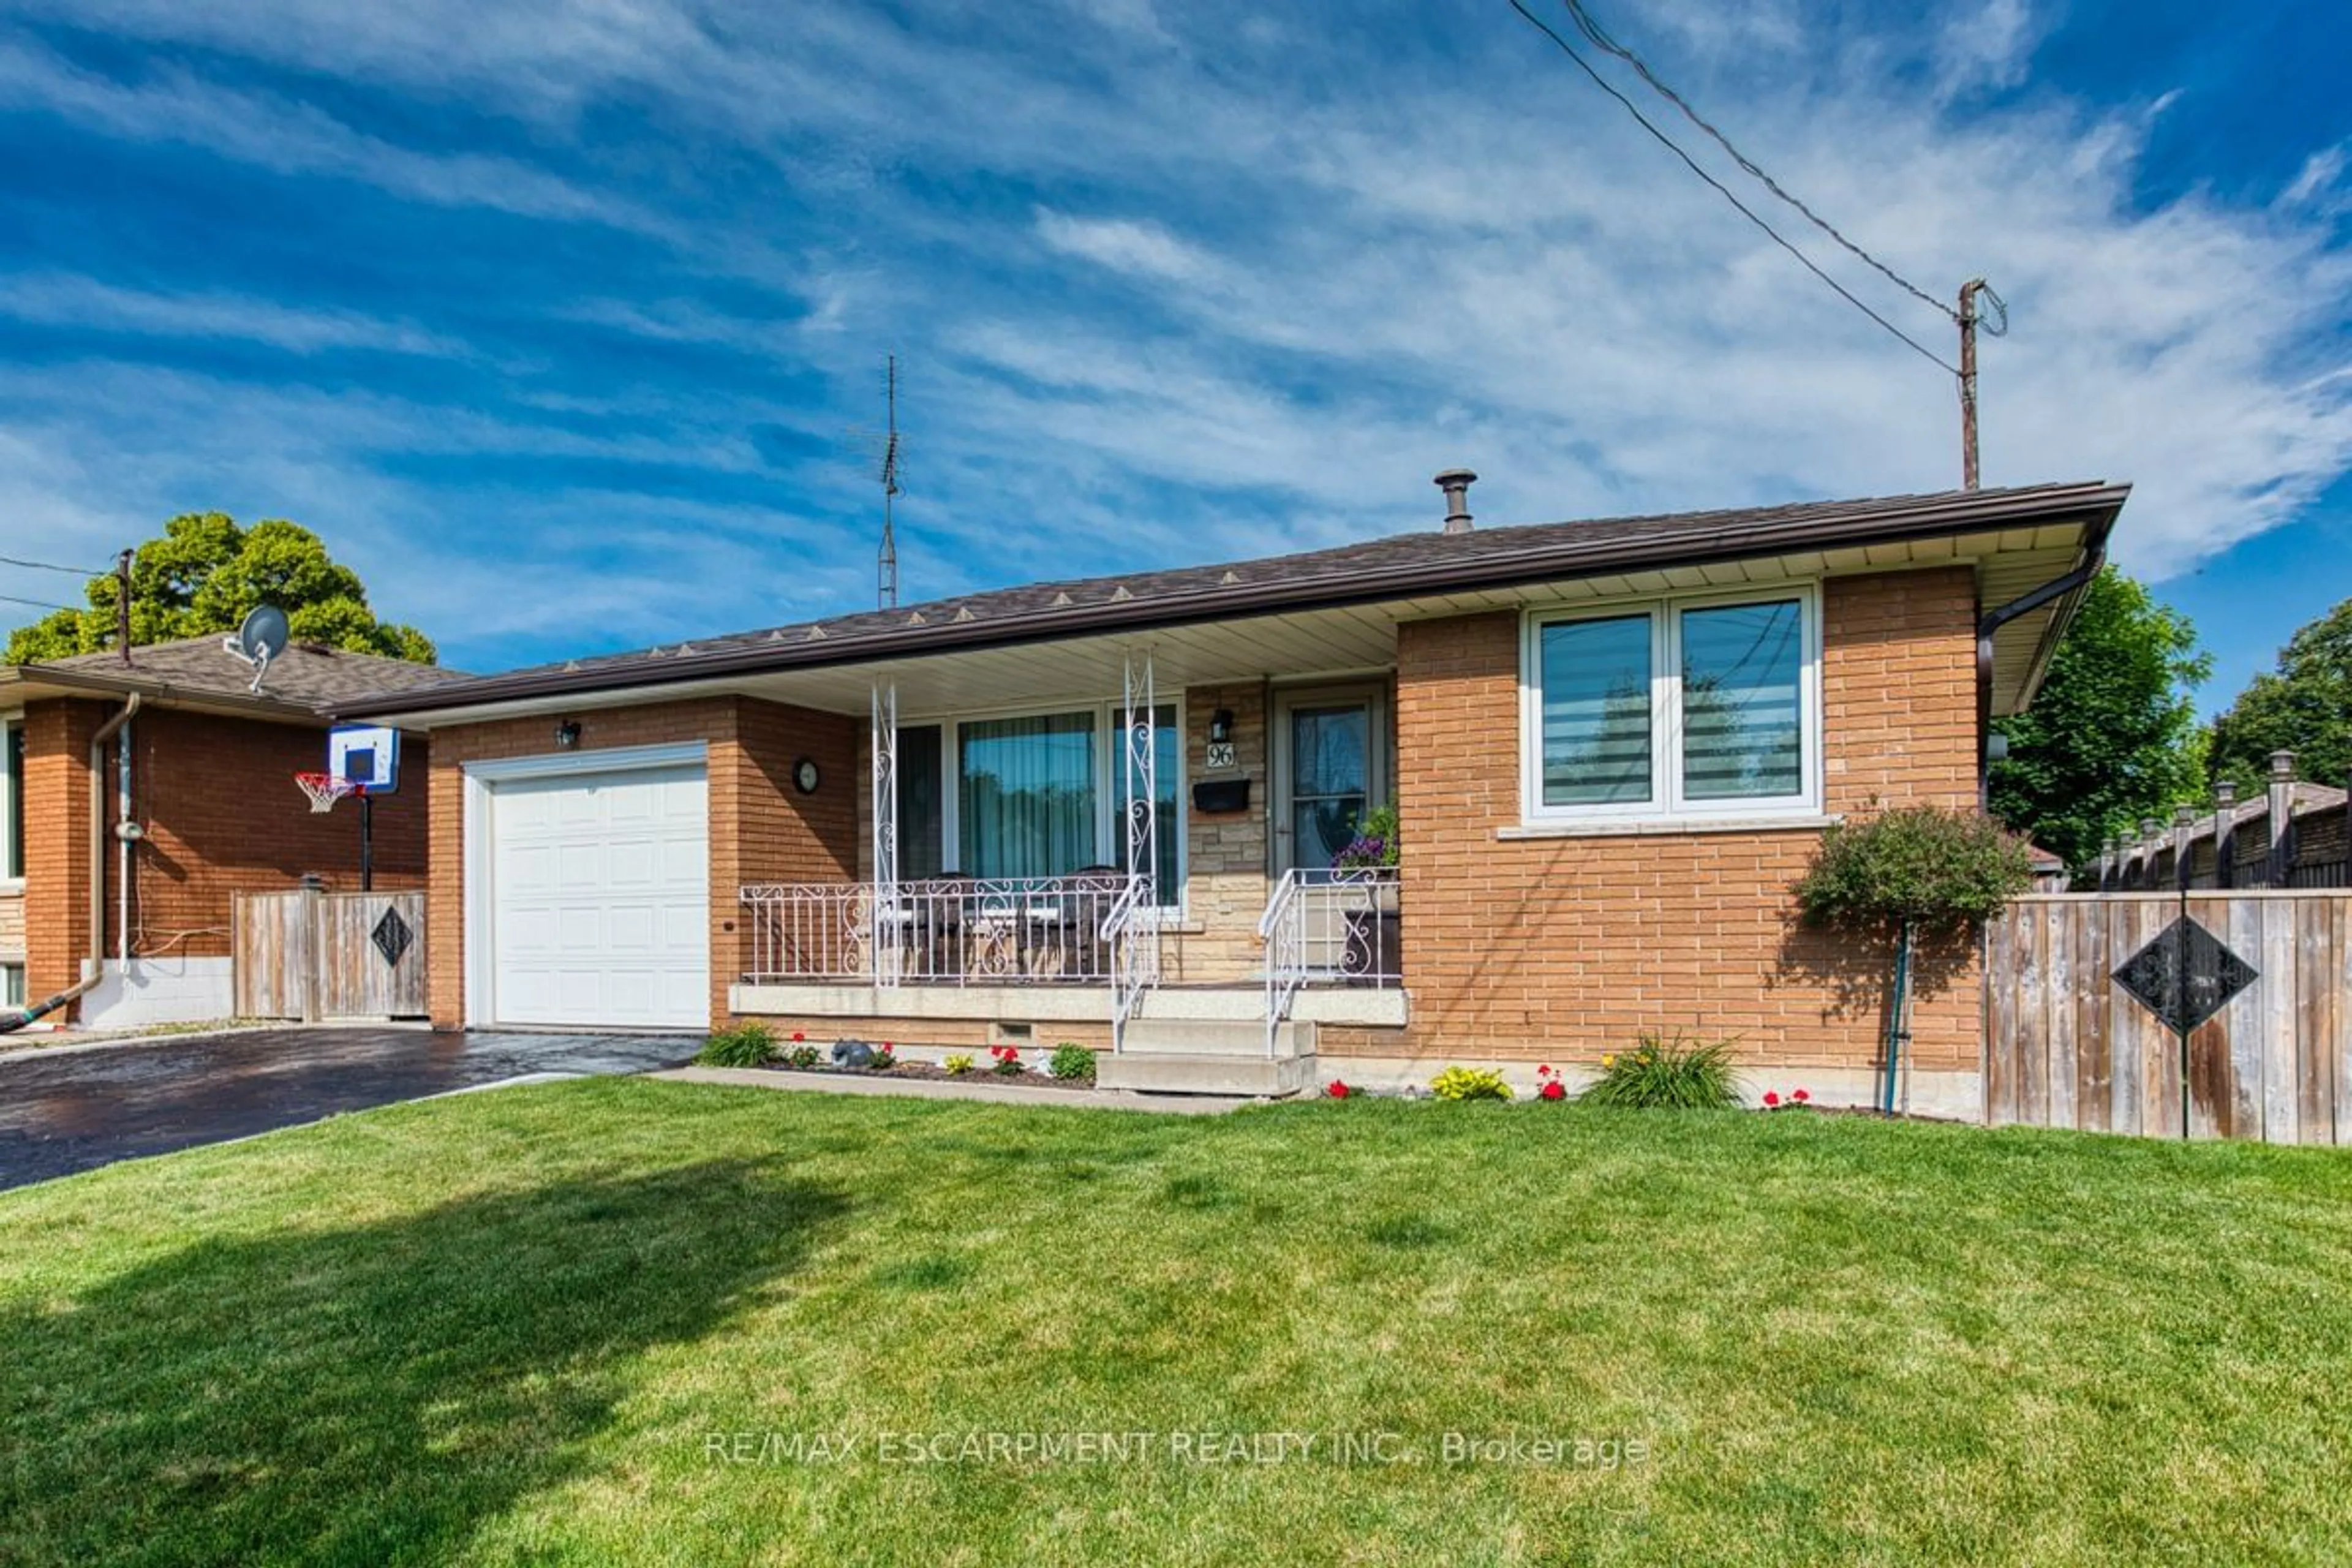 Home with brick exterior material for 96 Purdy Cres, Hamilton Ontario L9A 3B3